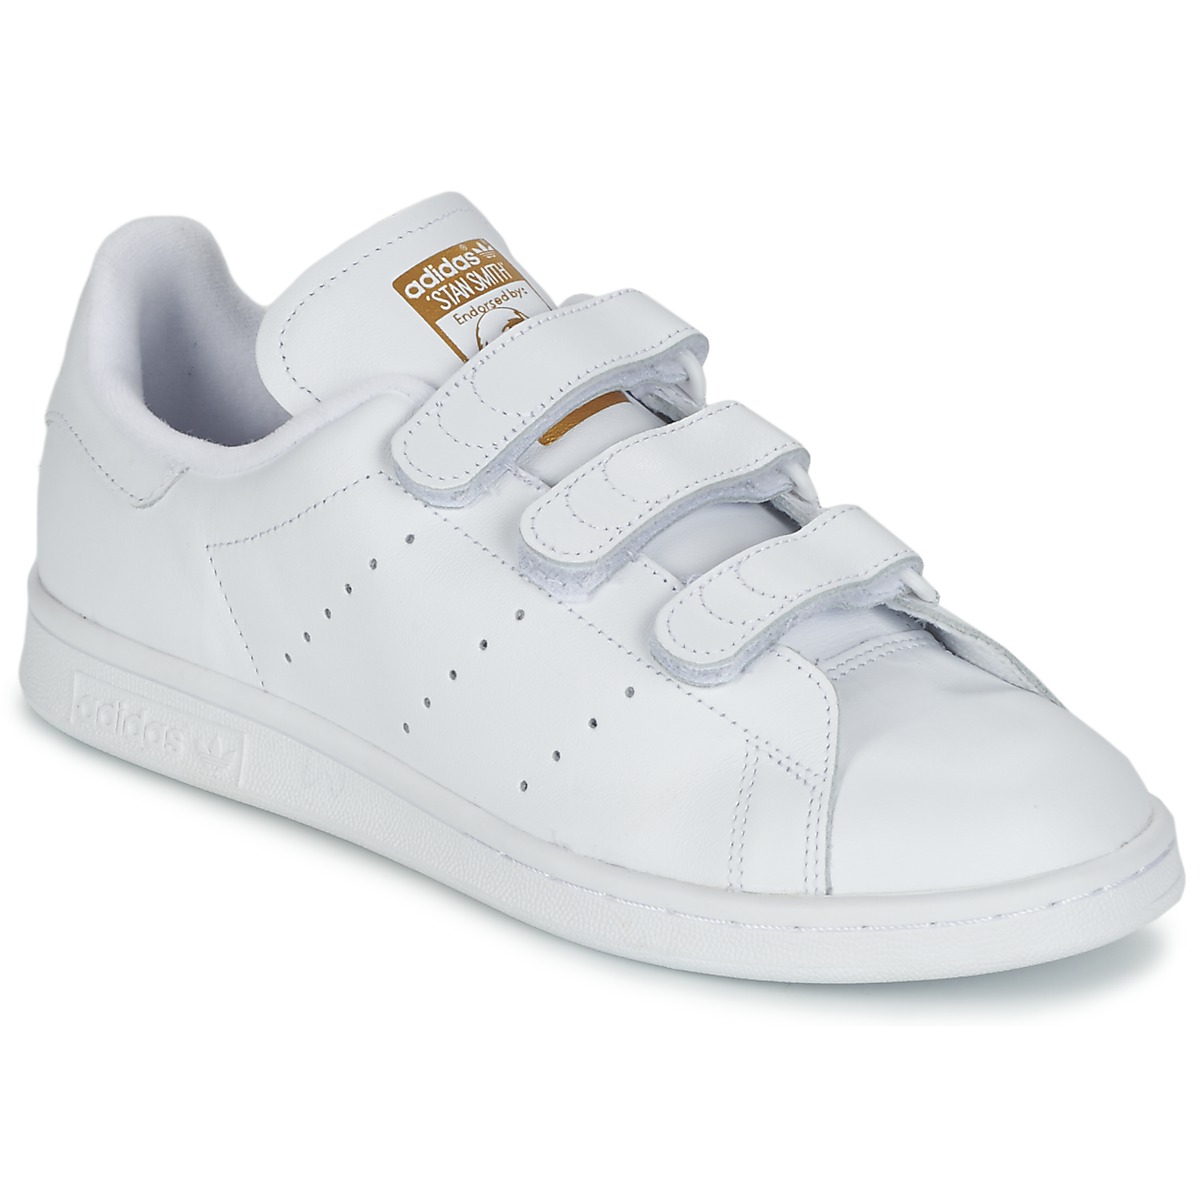 adidas stan smith cf j chaussures